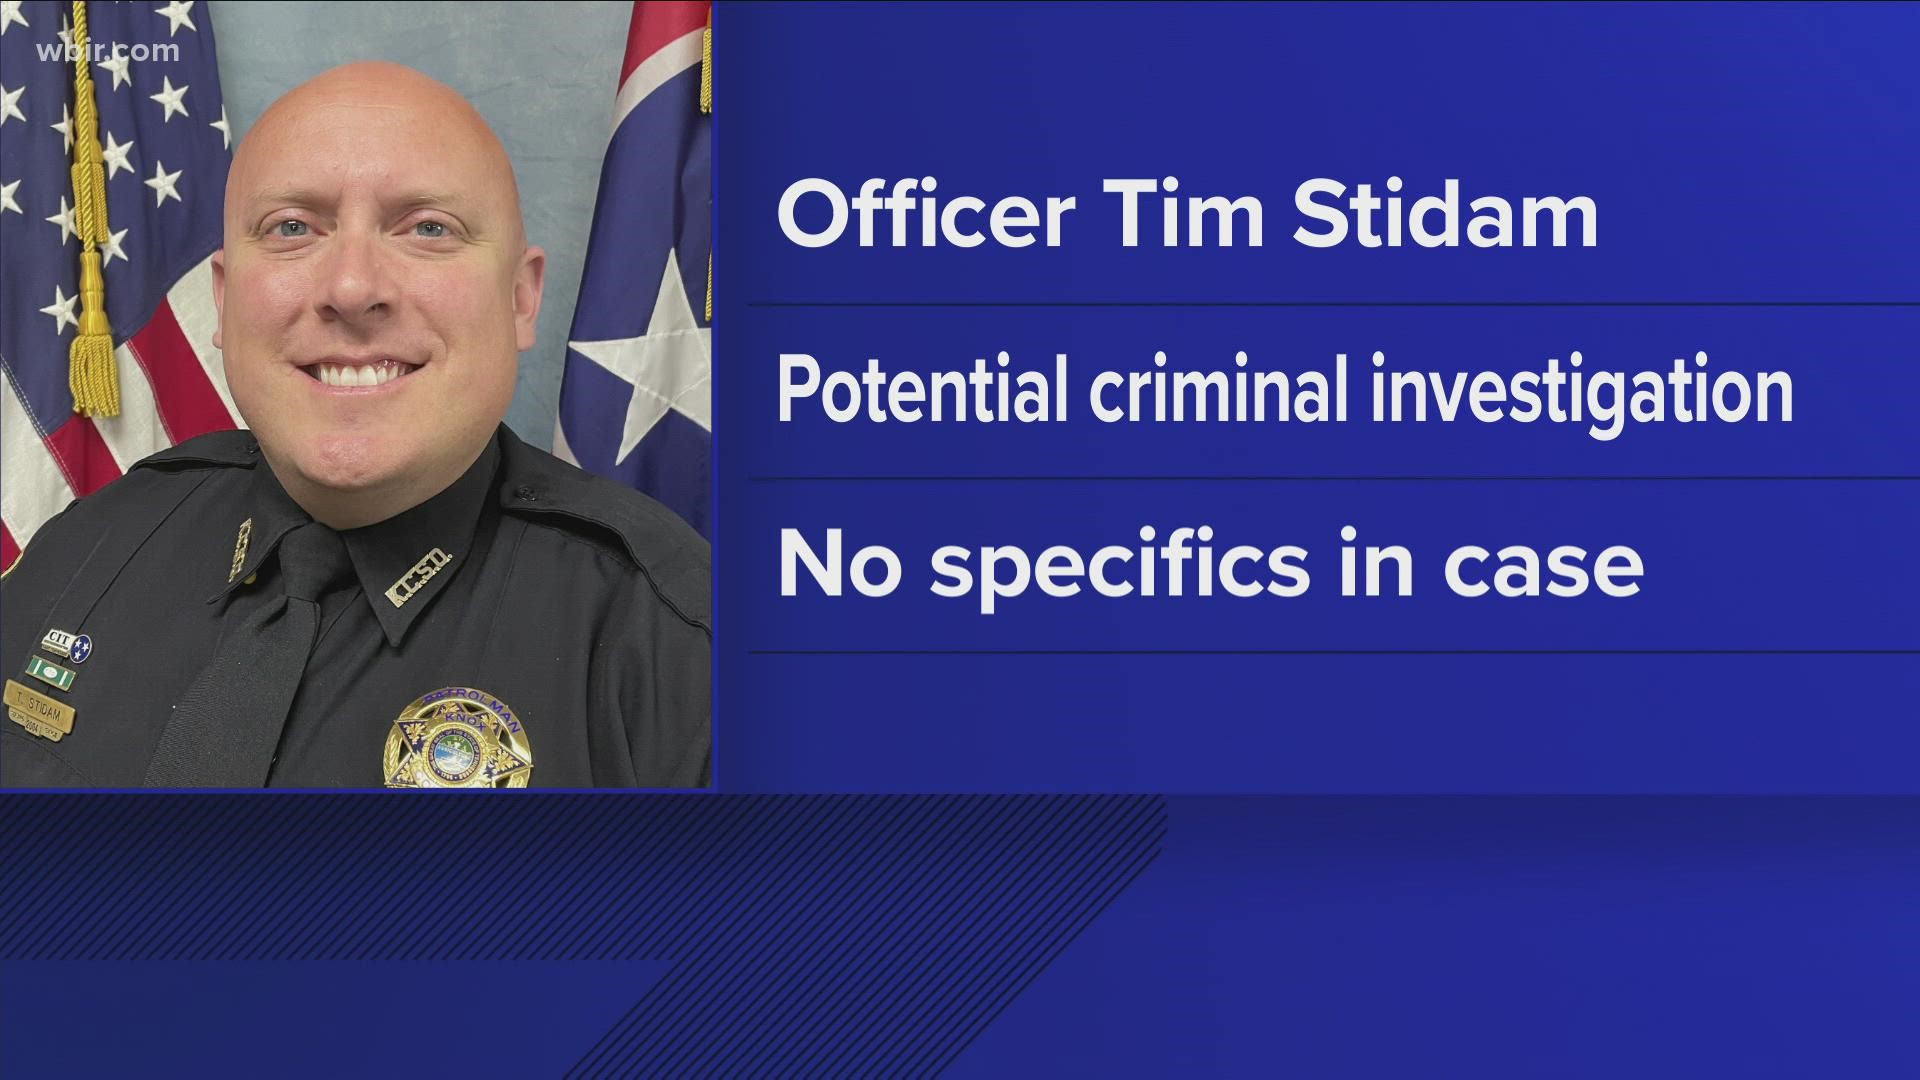 Tim Stidam was put on leave this month after the Office of Professional Standards became aware of an unspecified incident, a spokeswoman said.